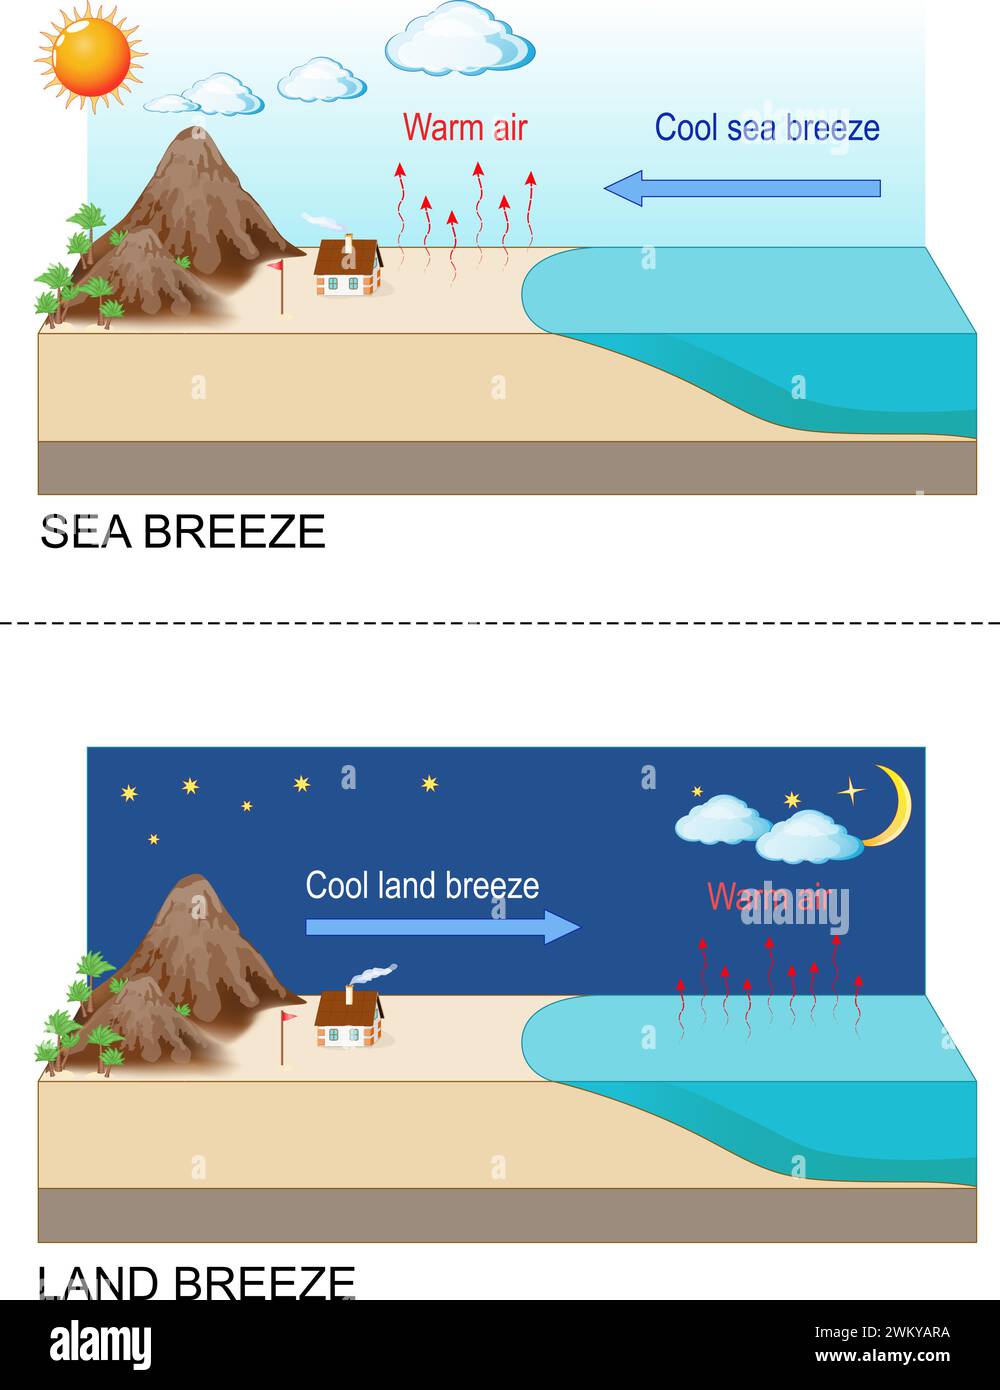 Sea breeze - cool air then rush towards the land. Land breeze - cool air rushes towards to ocean. Convection. Warm air rises up to form clouds. Atmosp Stock Vector